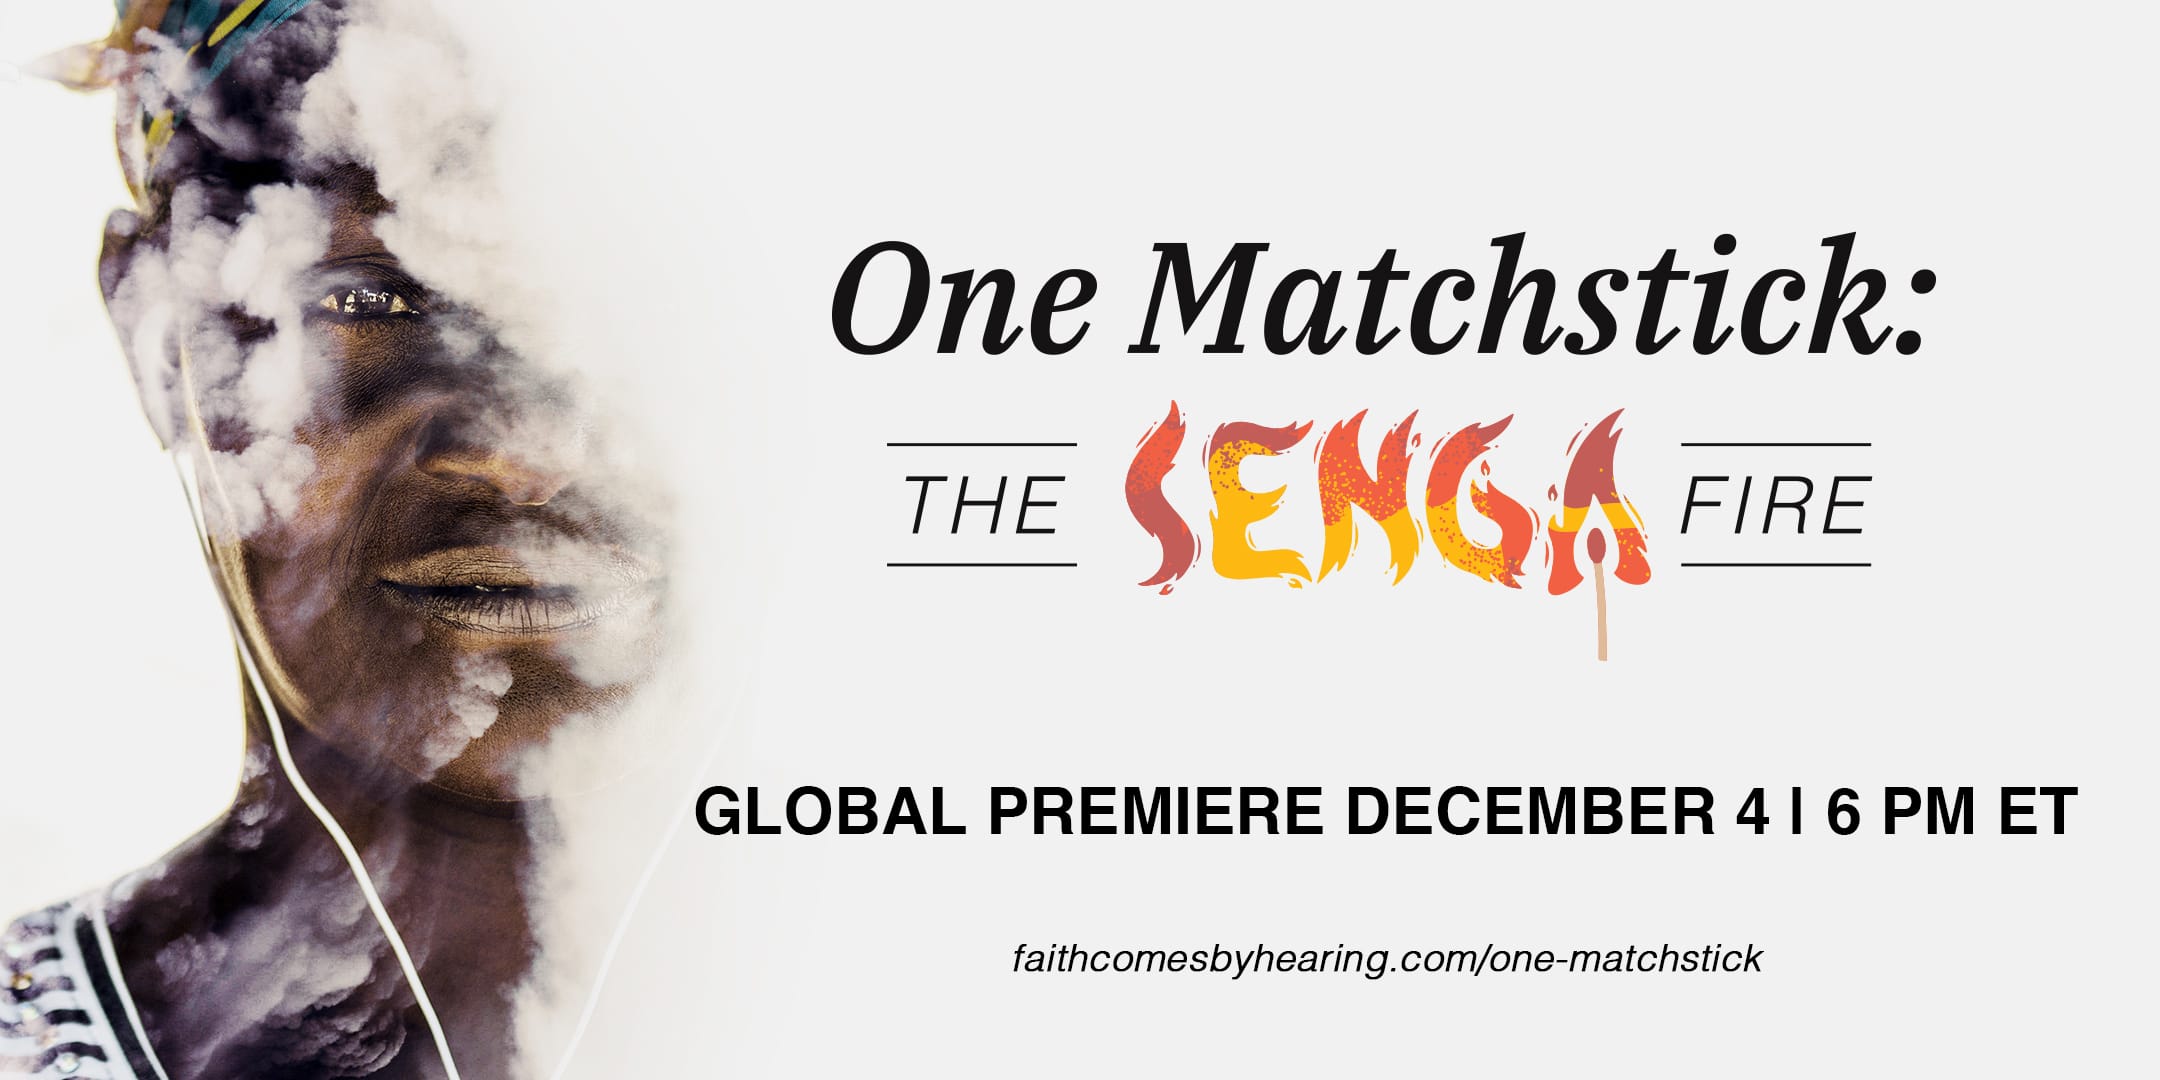 Faith Comes By Hearing celebrates 50 years of ministry with the worldwide premiere of One Matchstick: The Senga Fire on December 4, 2022.